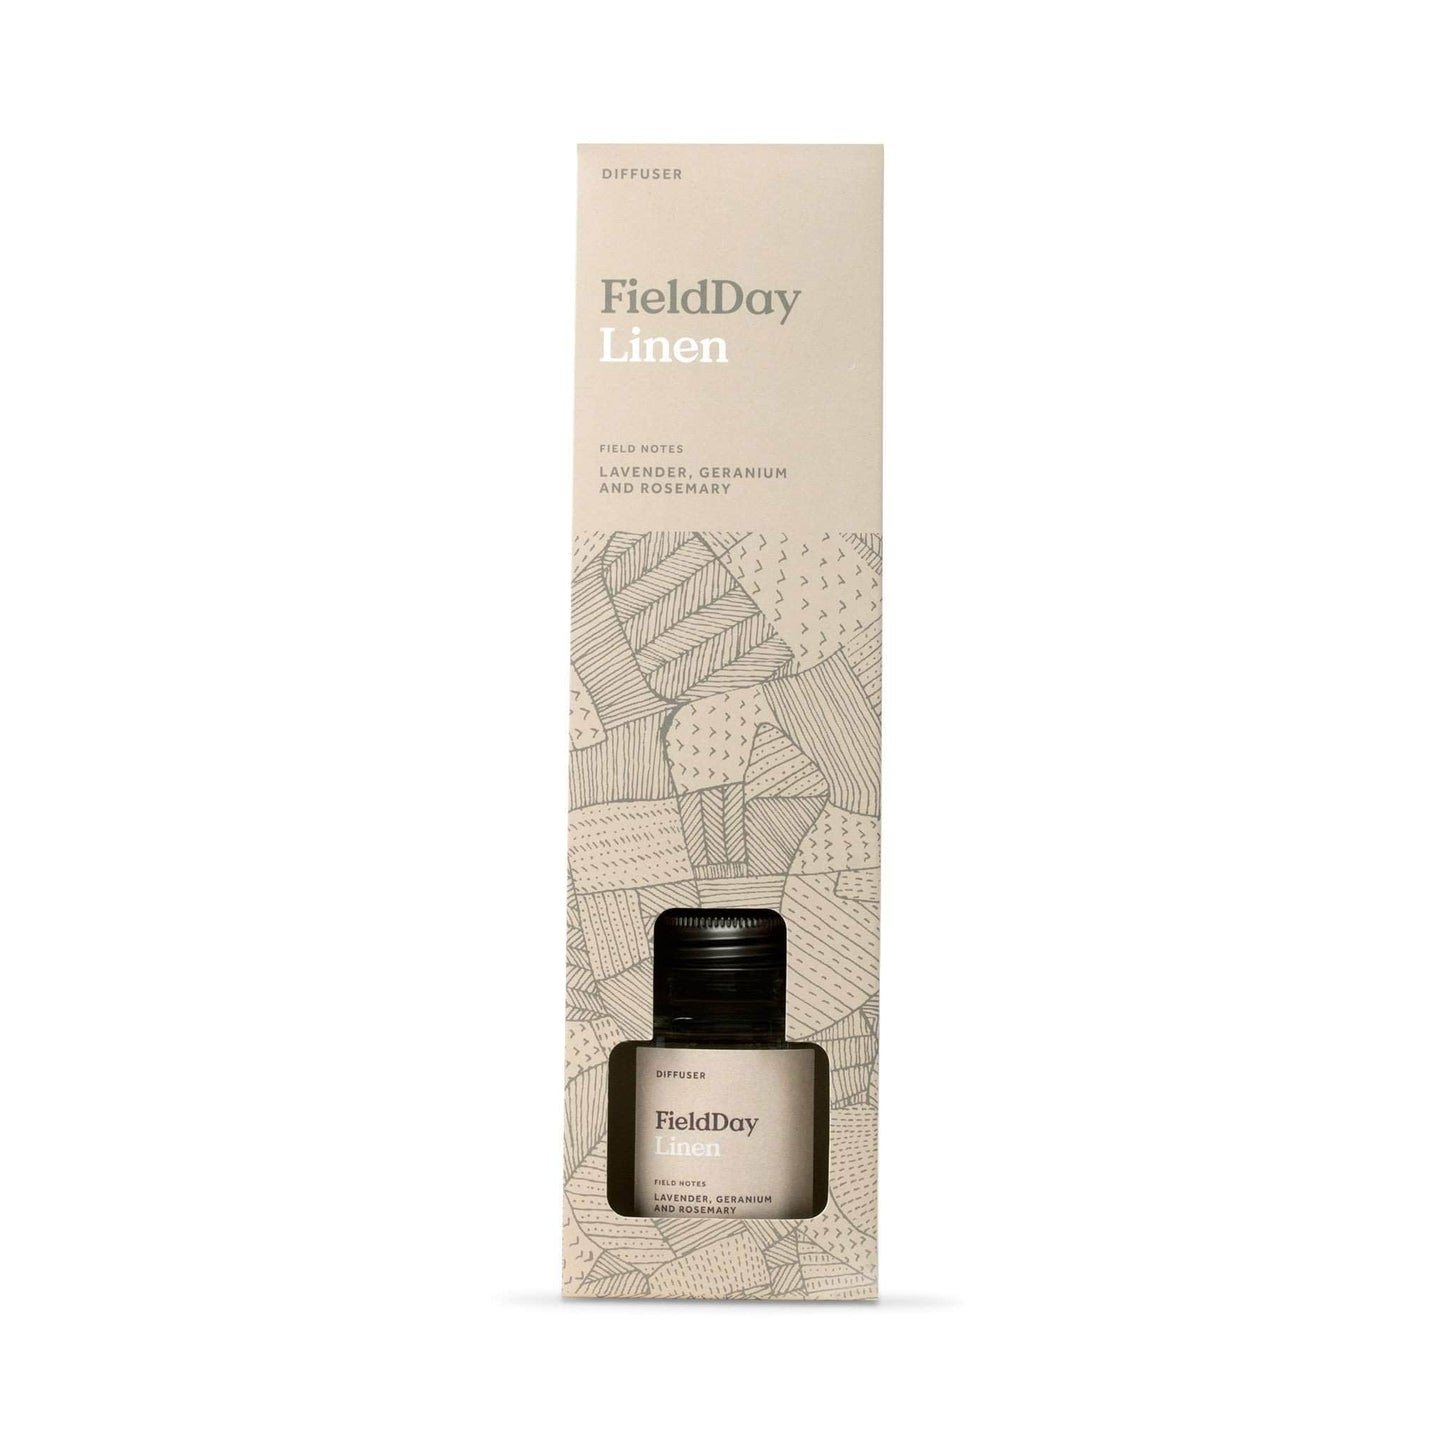 FieldDay Home Fragrance FieldDay Classic Collection Diffuser 100ml - Linen